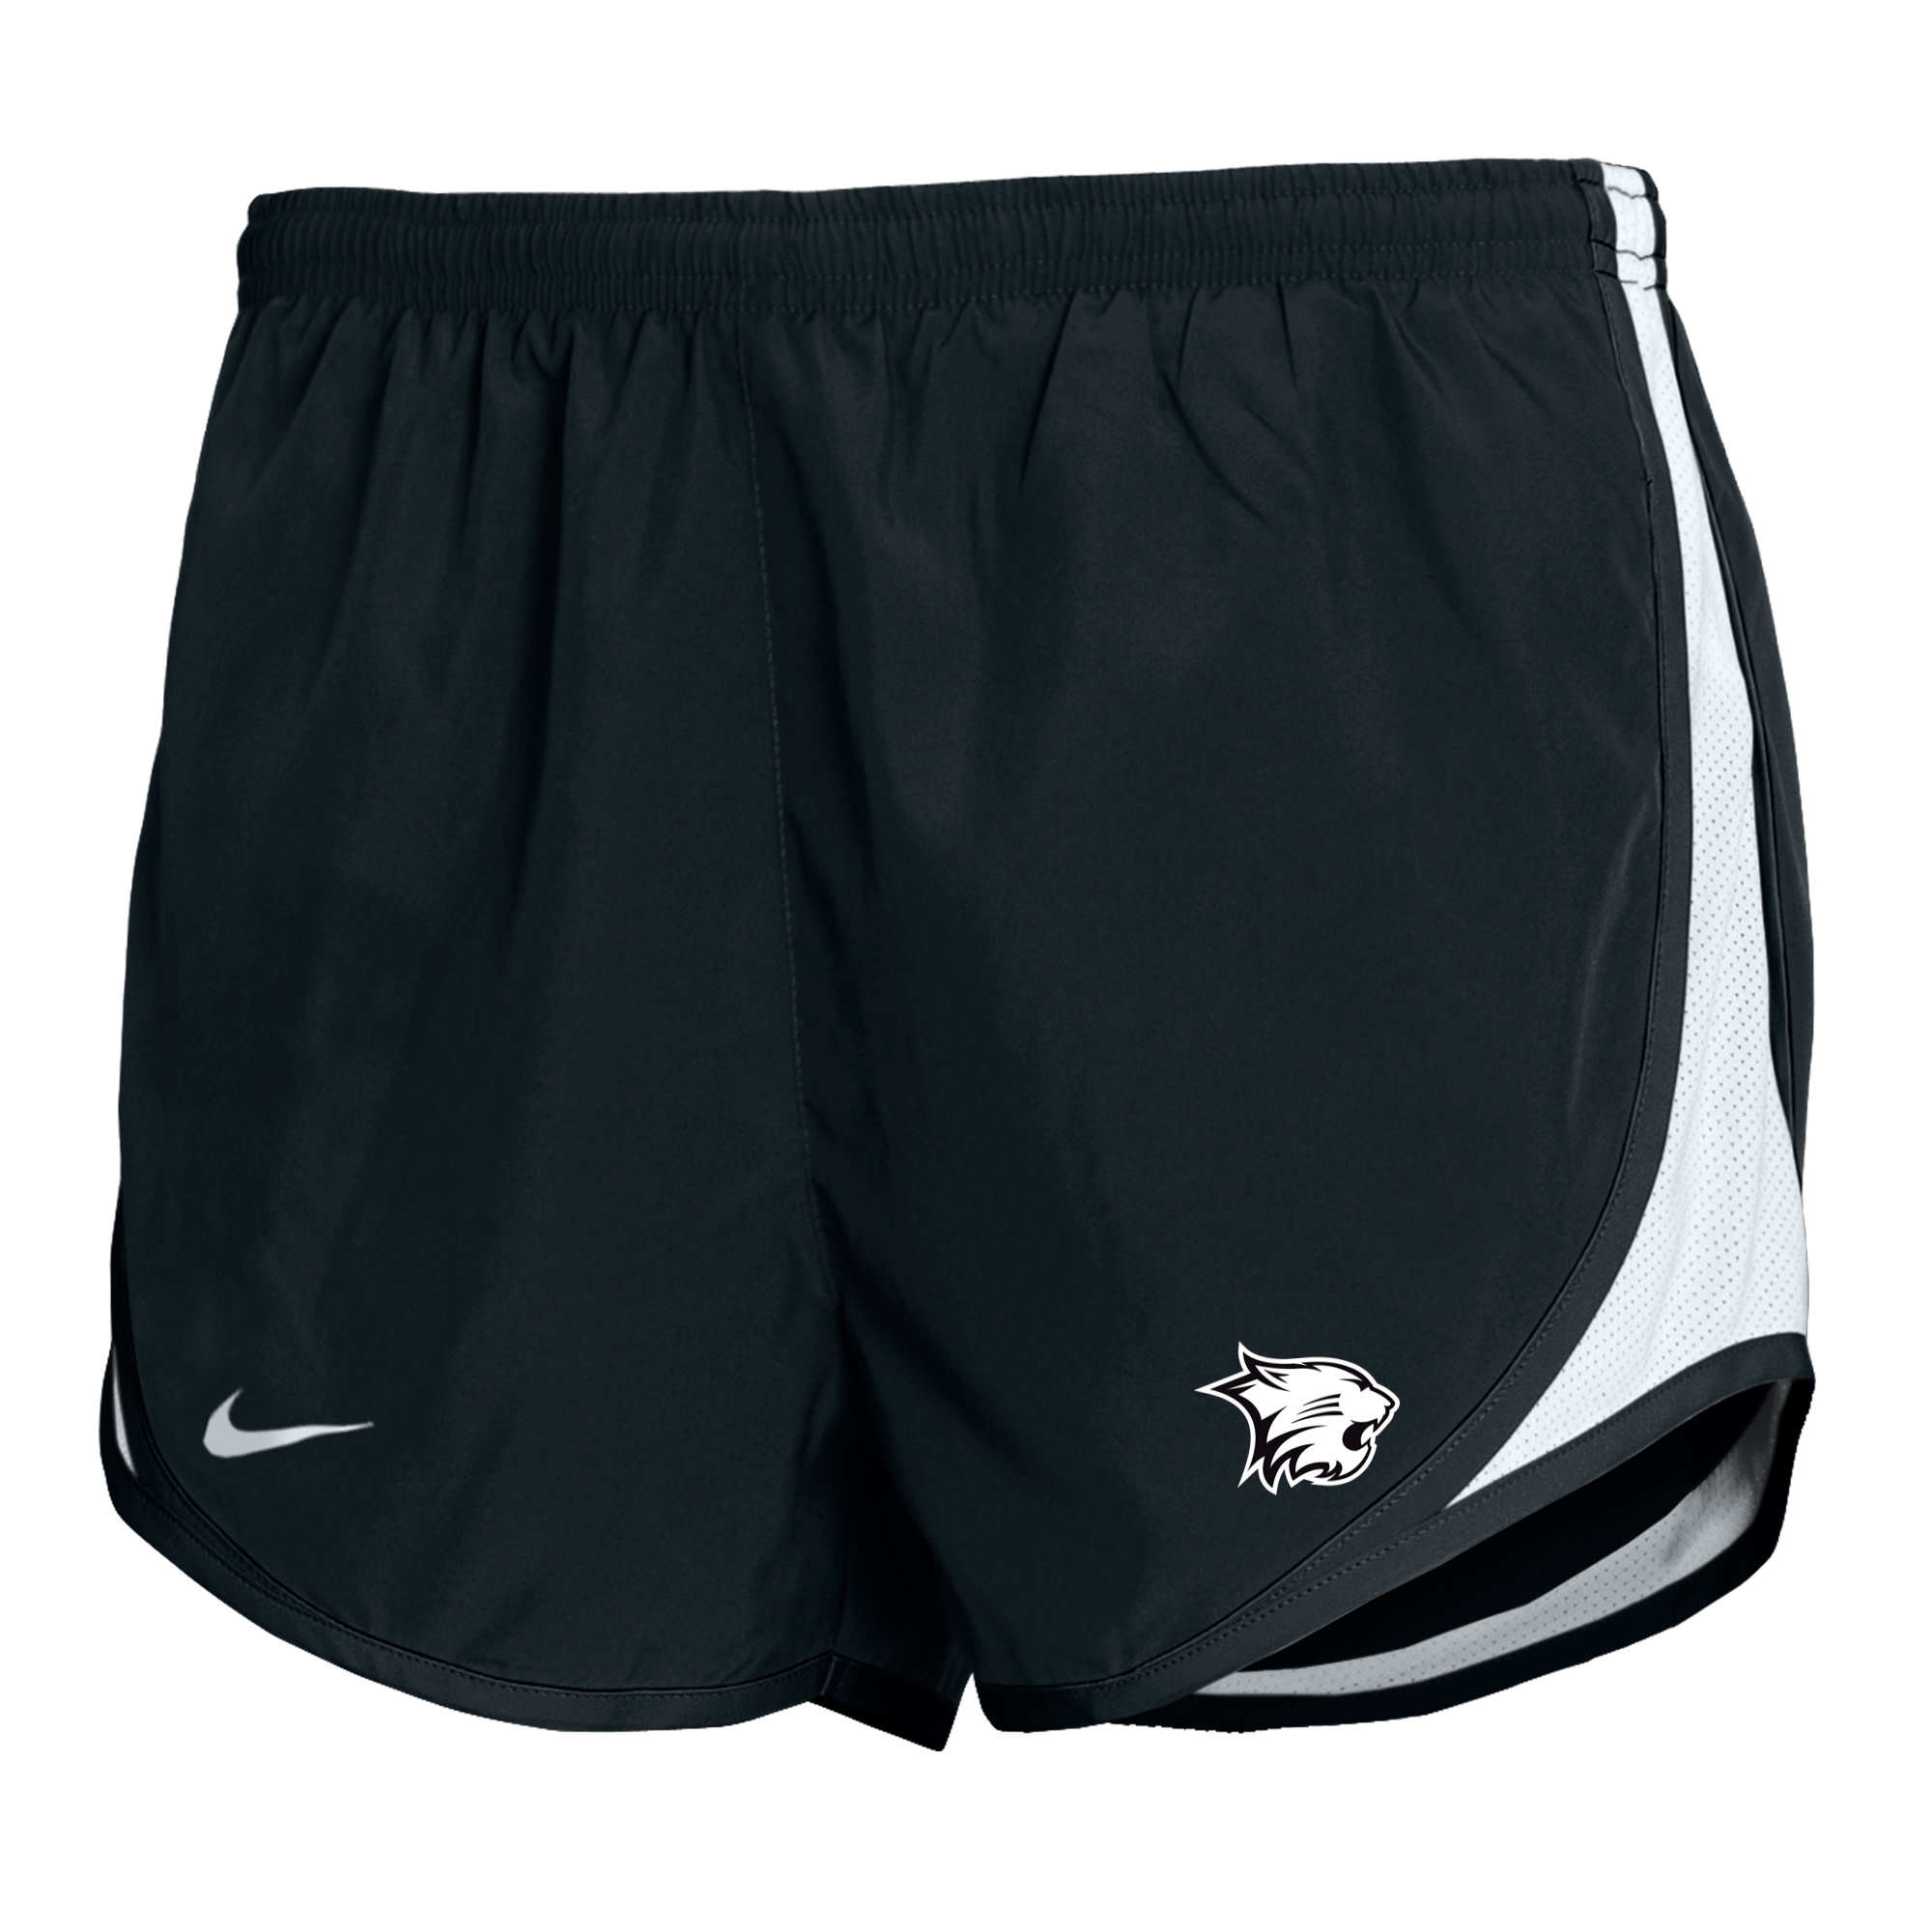 Shorts: Nike Tempo - The Westminster Schools